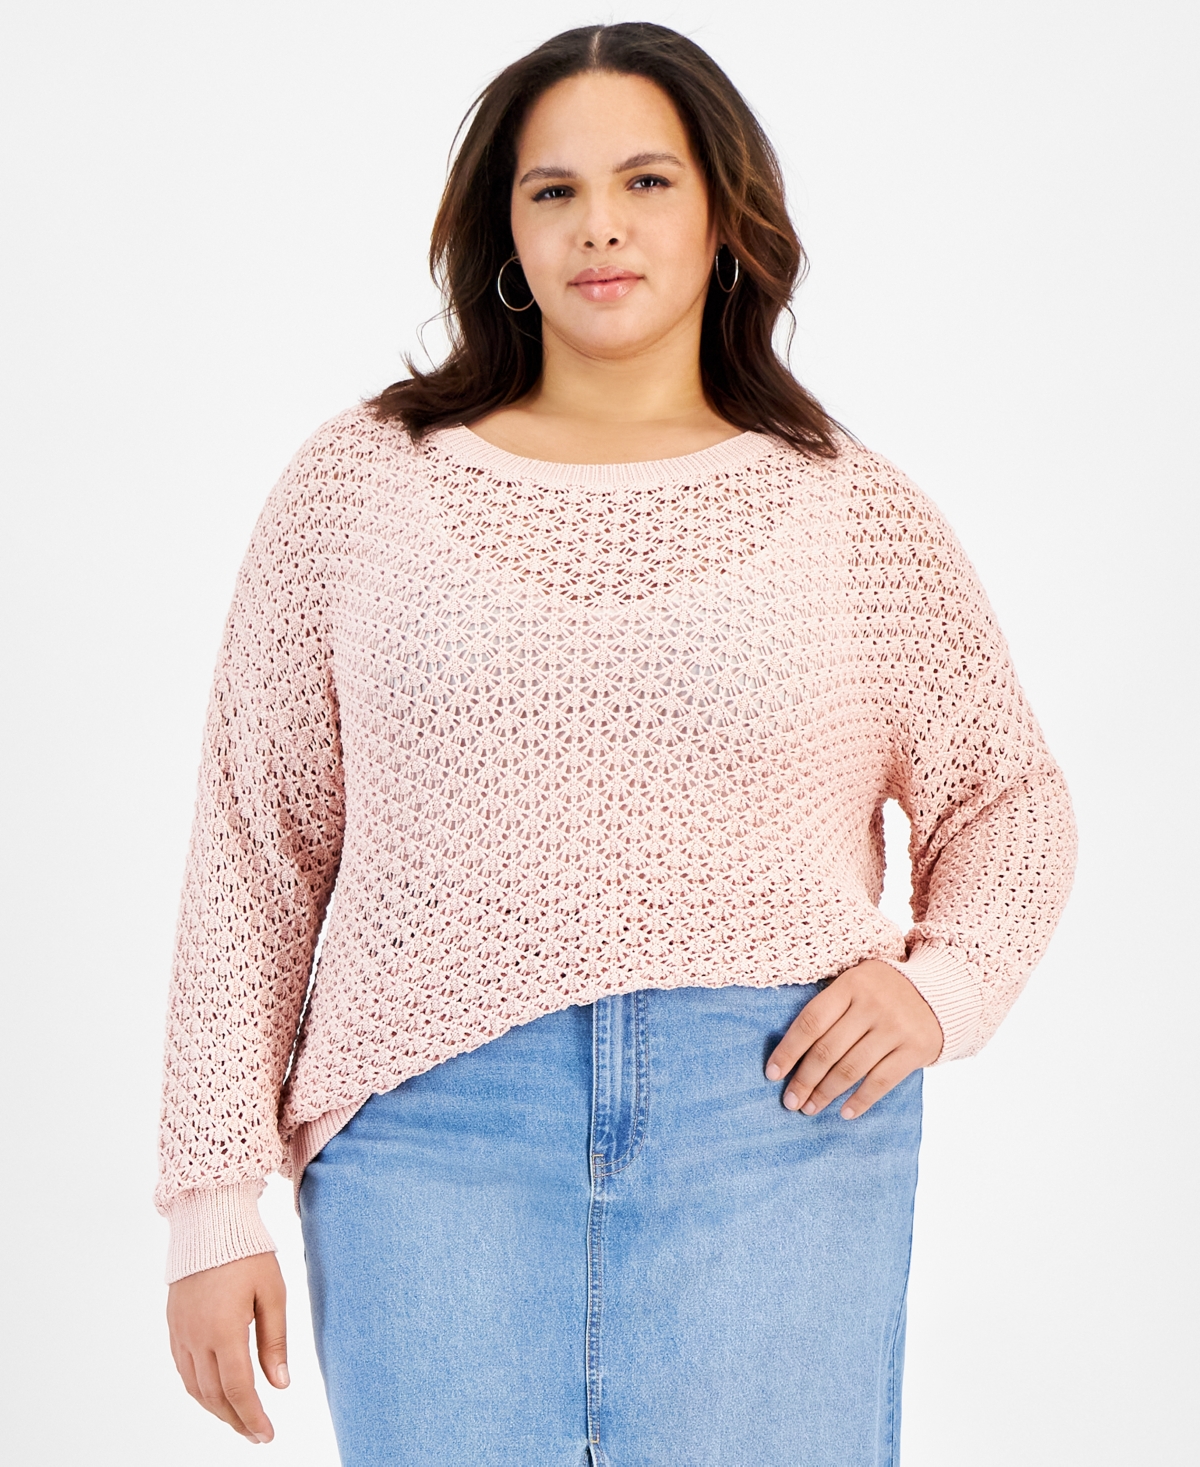 Plus Size Crocheted Sweater - Lotus Pink